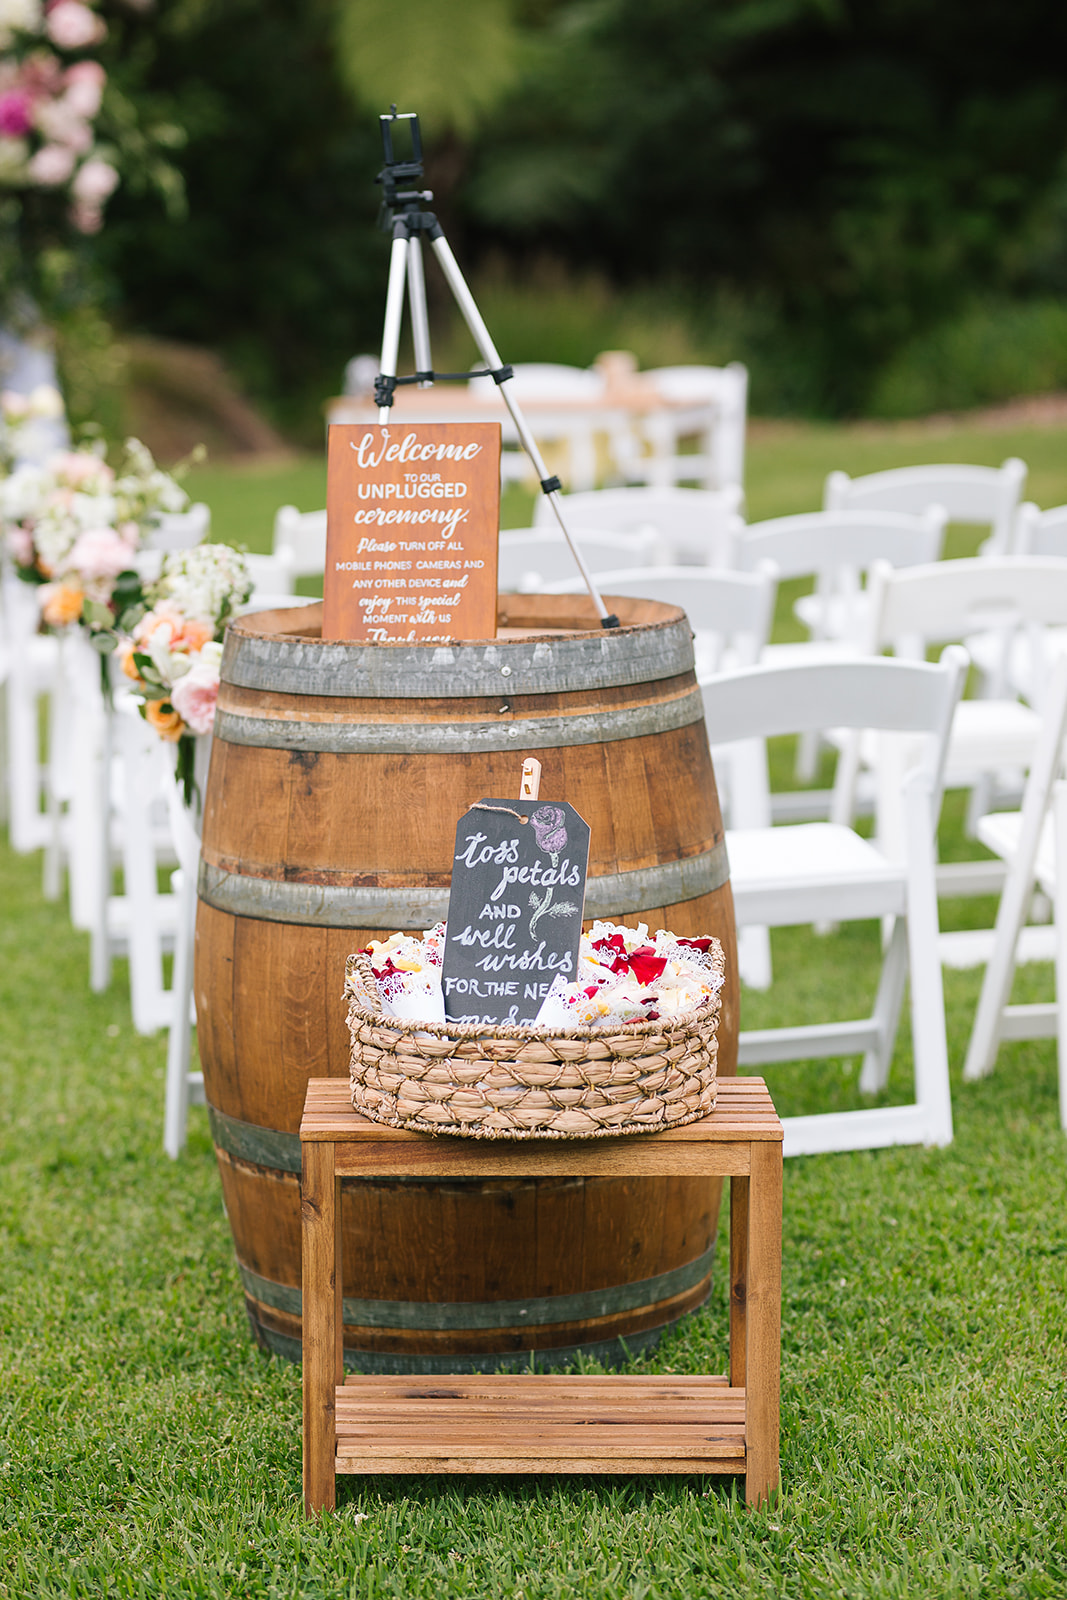 Wine Barrel and Welcome Sign at Wedding Ceremony in Garden